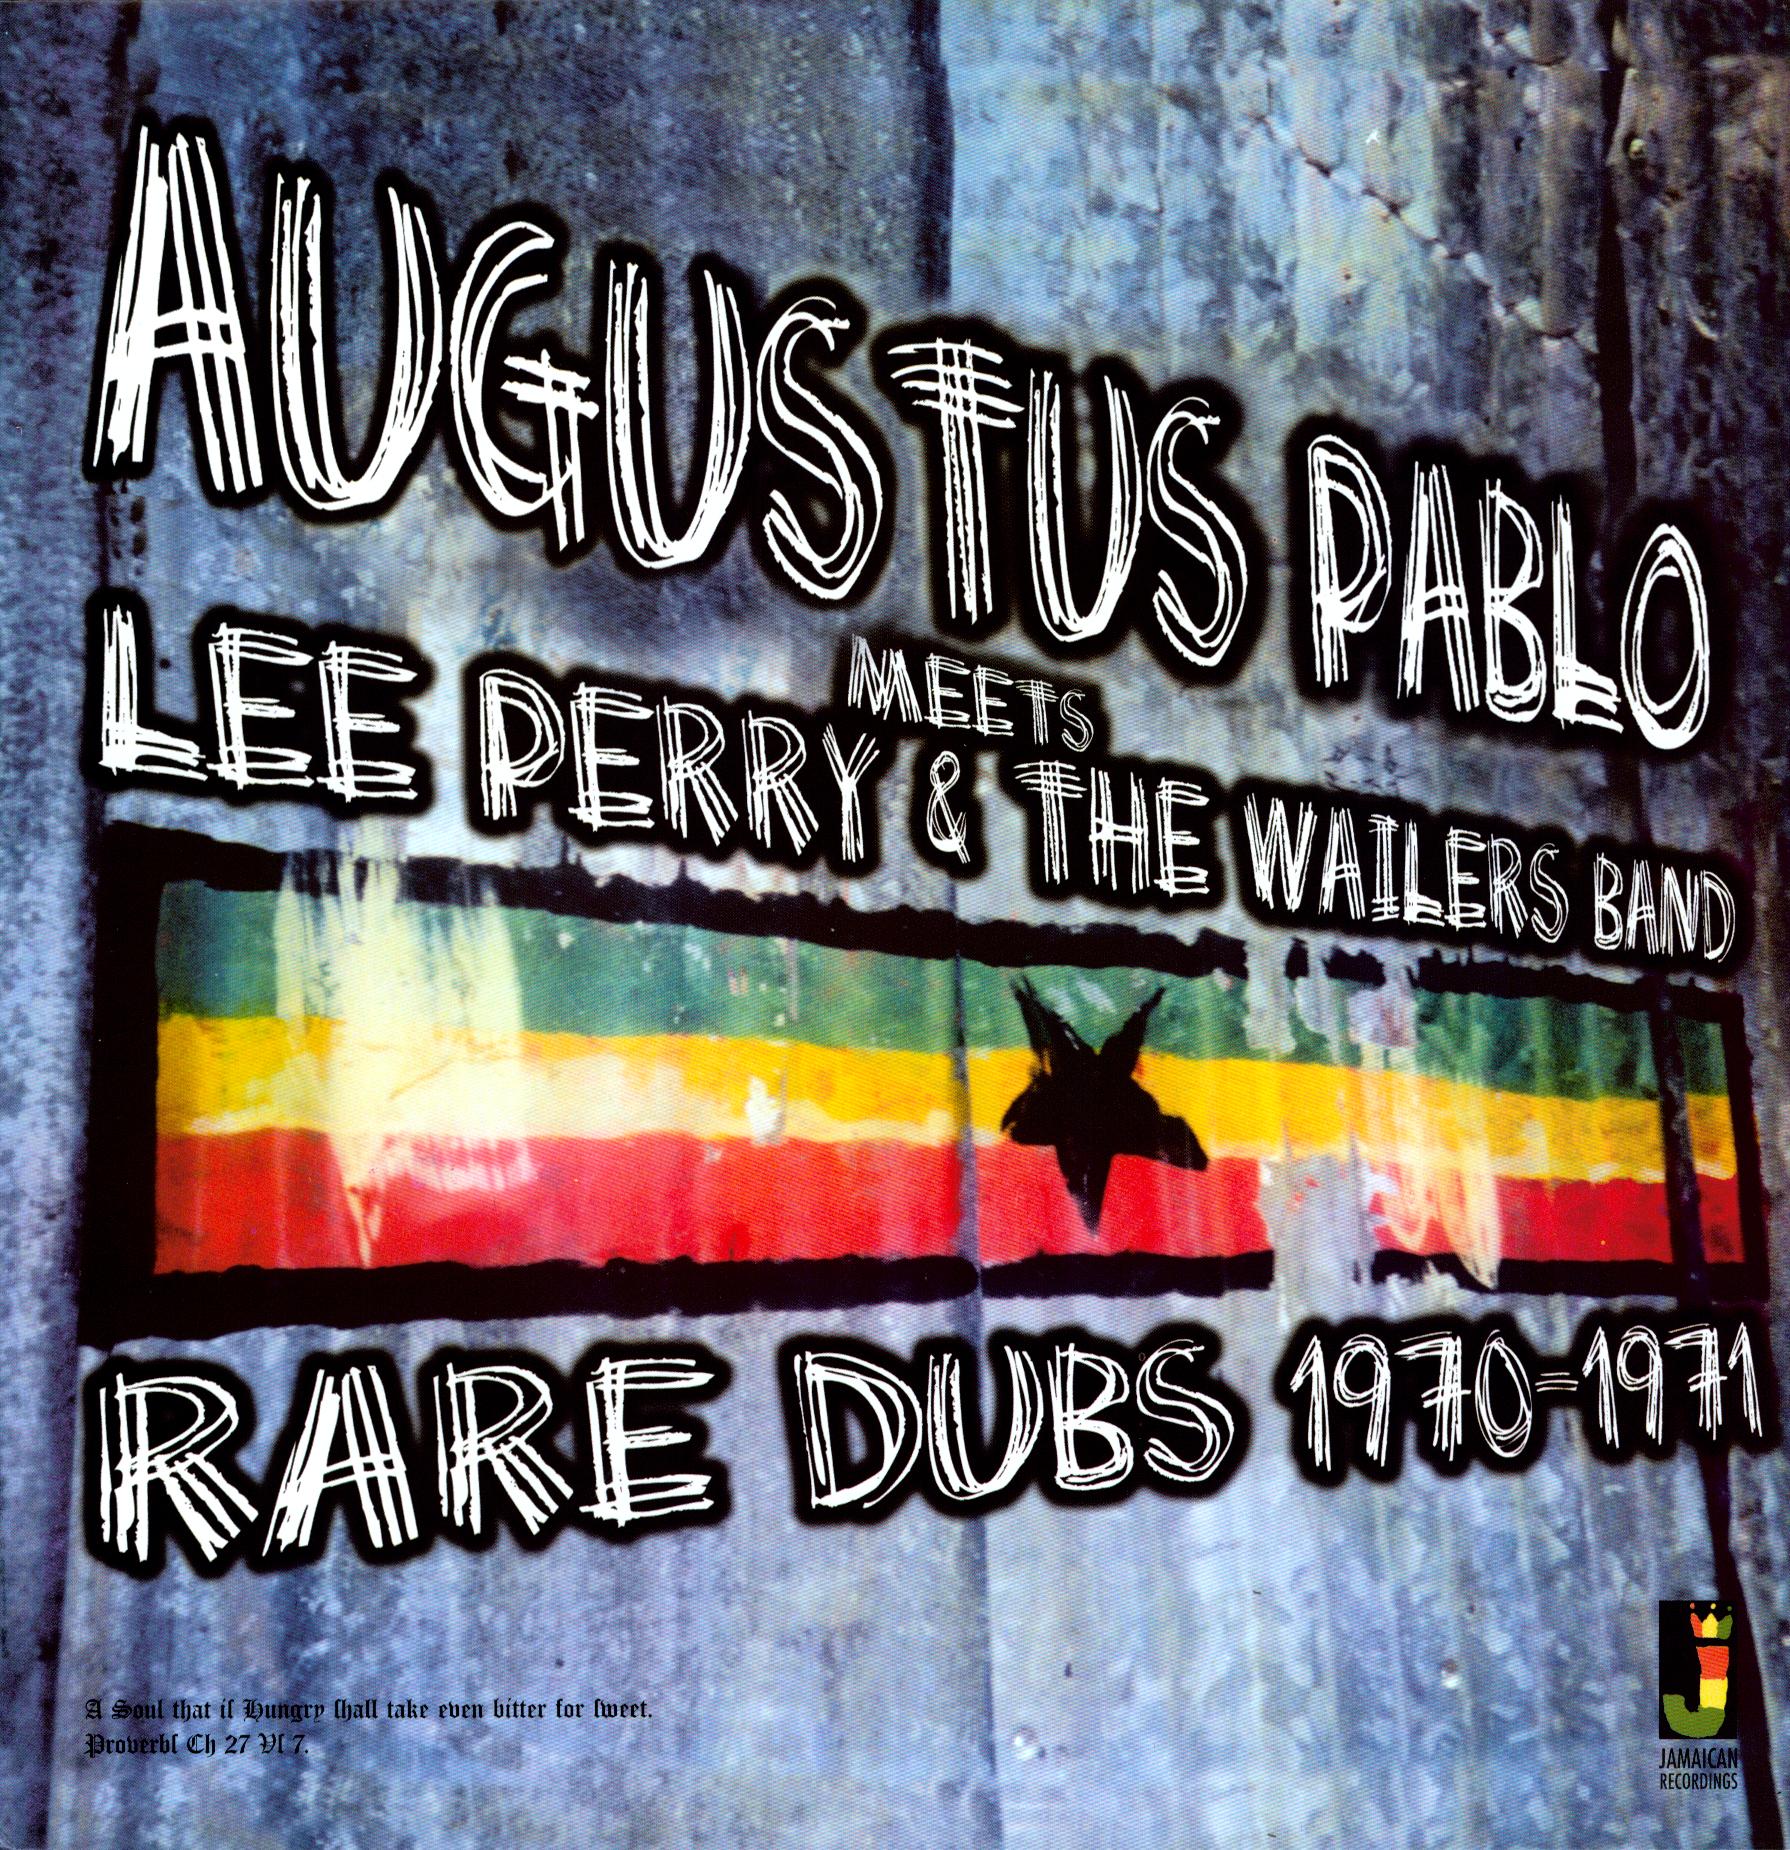 MEETS LEE PERRY & THE WAILERS BAND - RARE DUBS